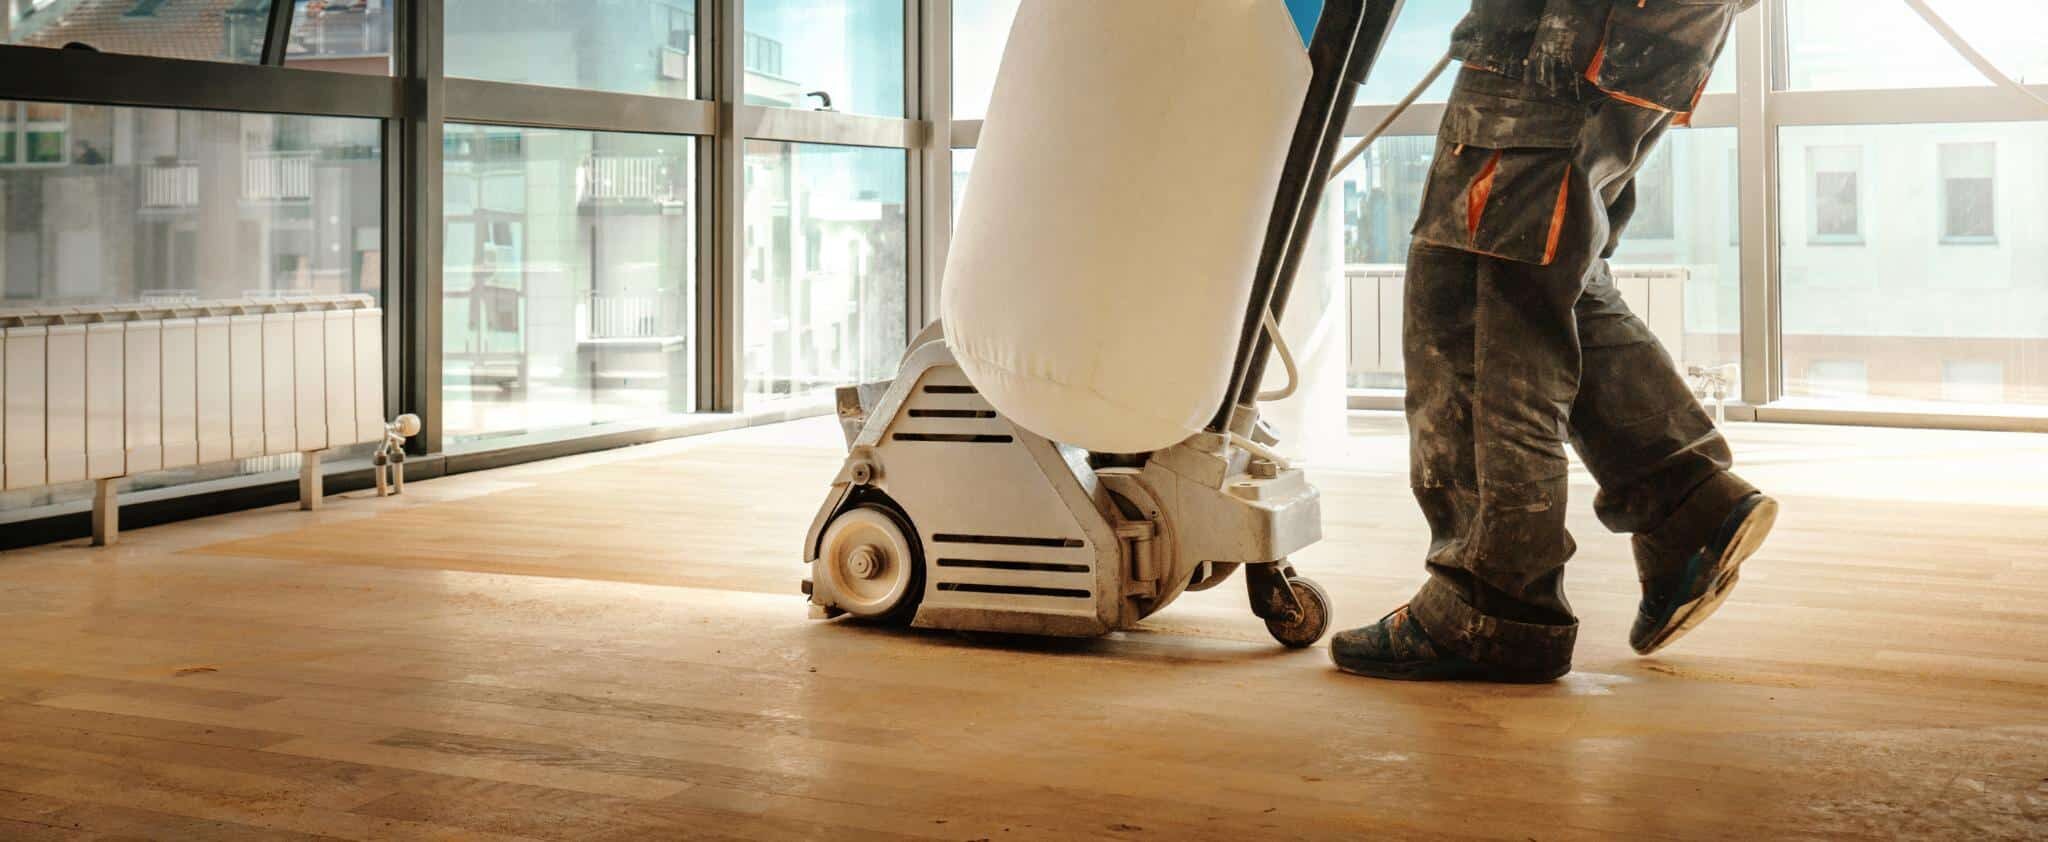 In Canary Wharf, E14, Mr Sander® utilize a Bona Scorpion drum sander, boasting dimensions of 200 mm and an effect of 1.5 kW. Powered by 240 V voltage and 50 Hz frequency, it is connected to a dust extraction system with a HEPA filter for cleanliness and efficiency. 